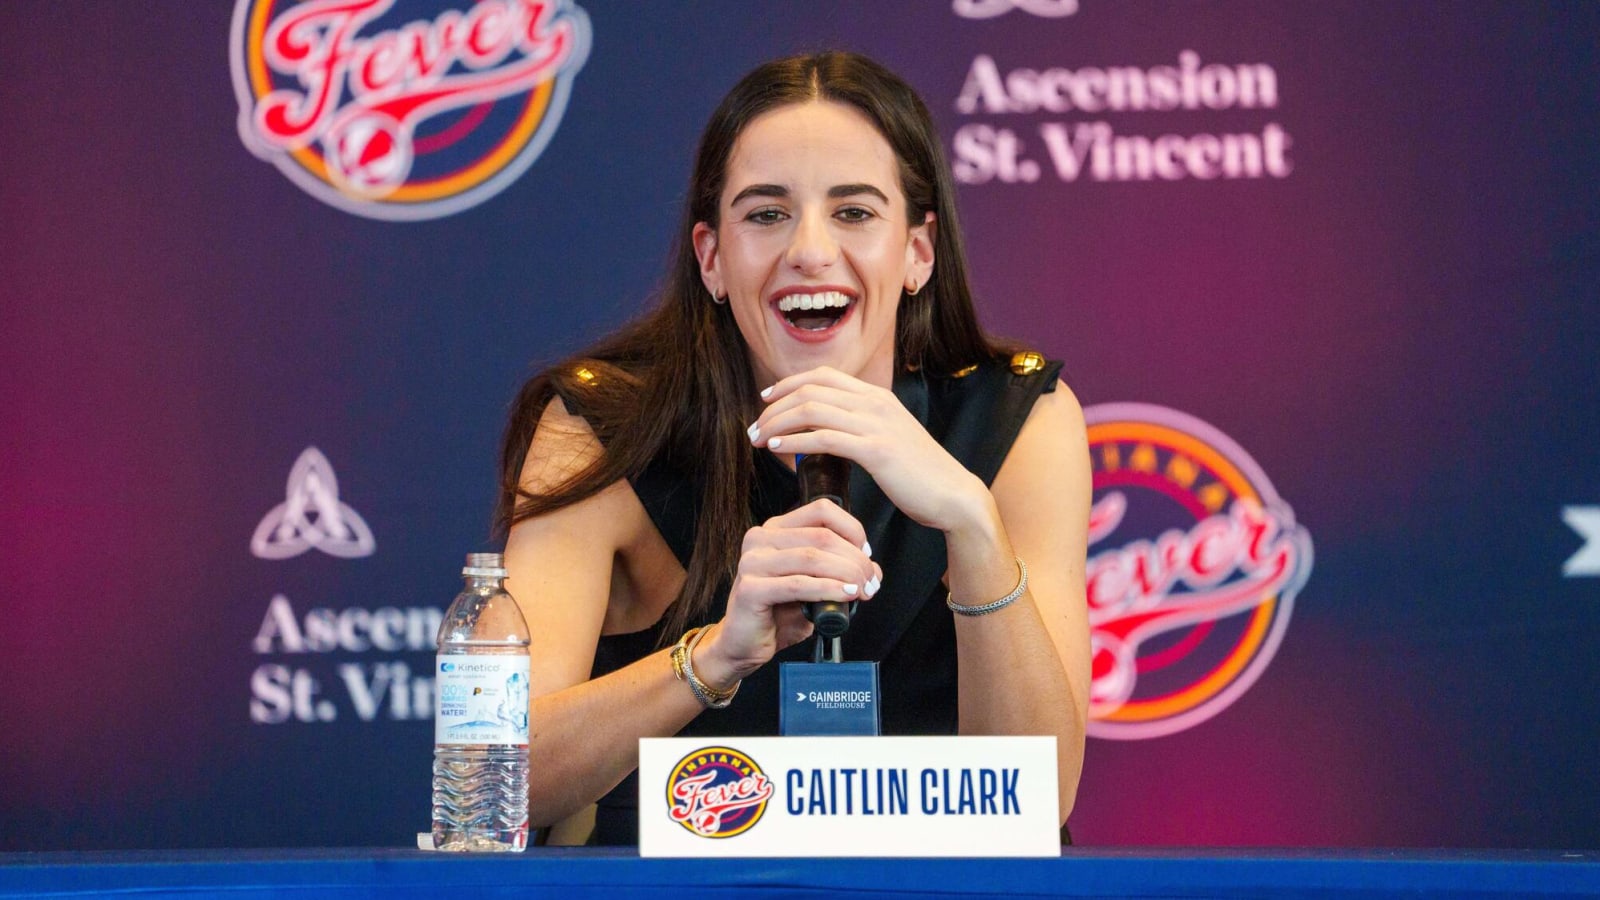 Indiana Fever: Caitlin Clark’s Beautiful Response to Deep Question Will Have Fans Loving Her More